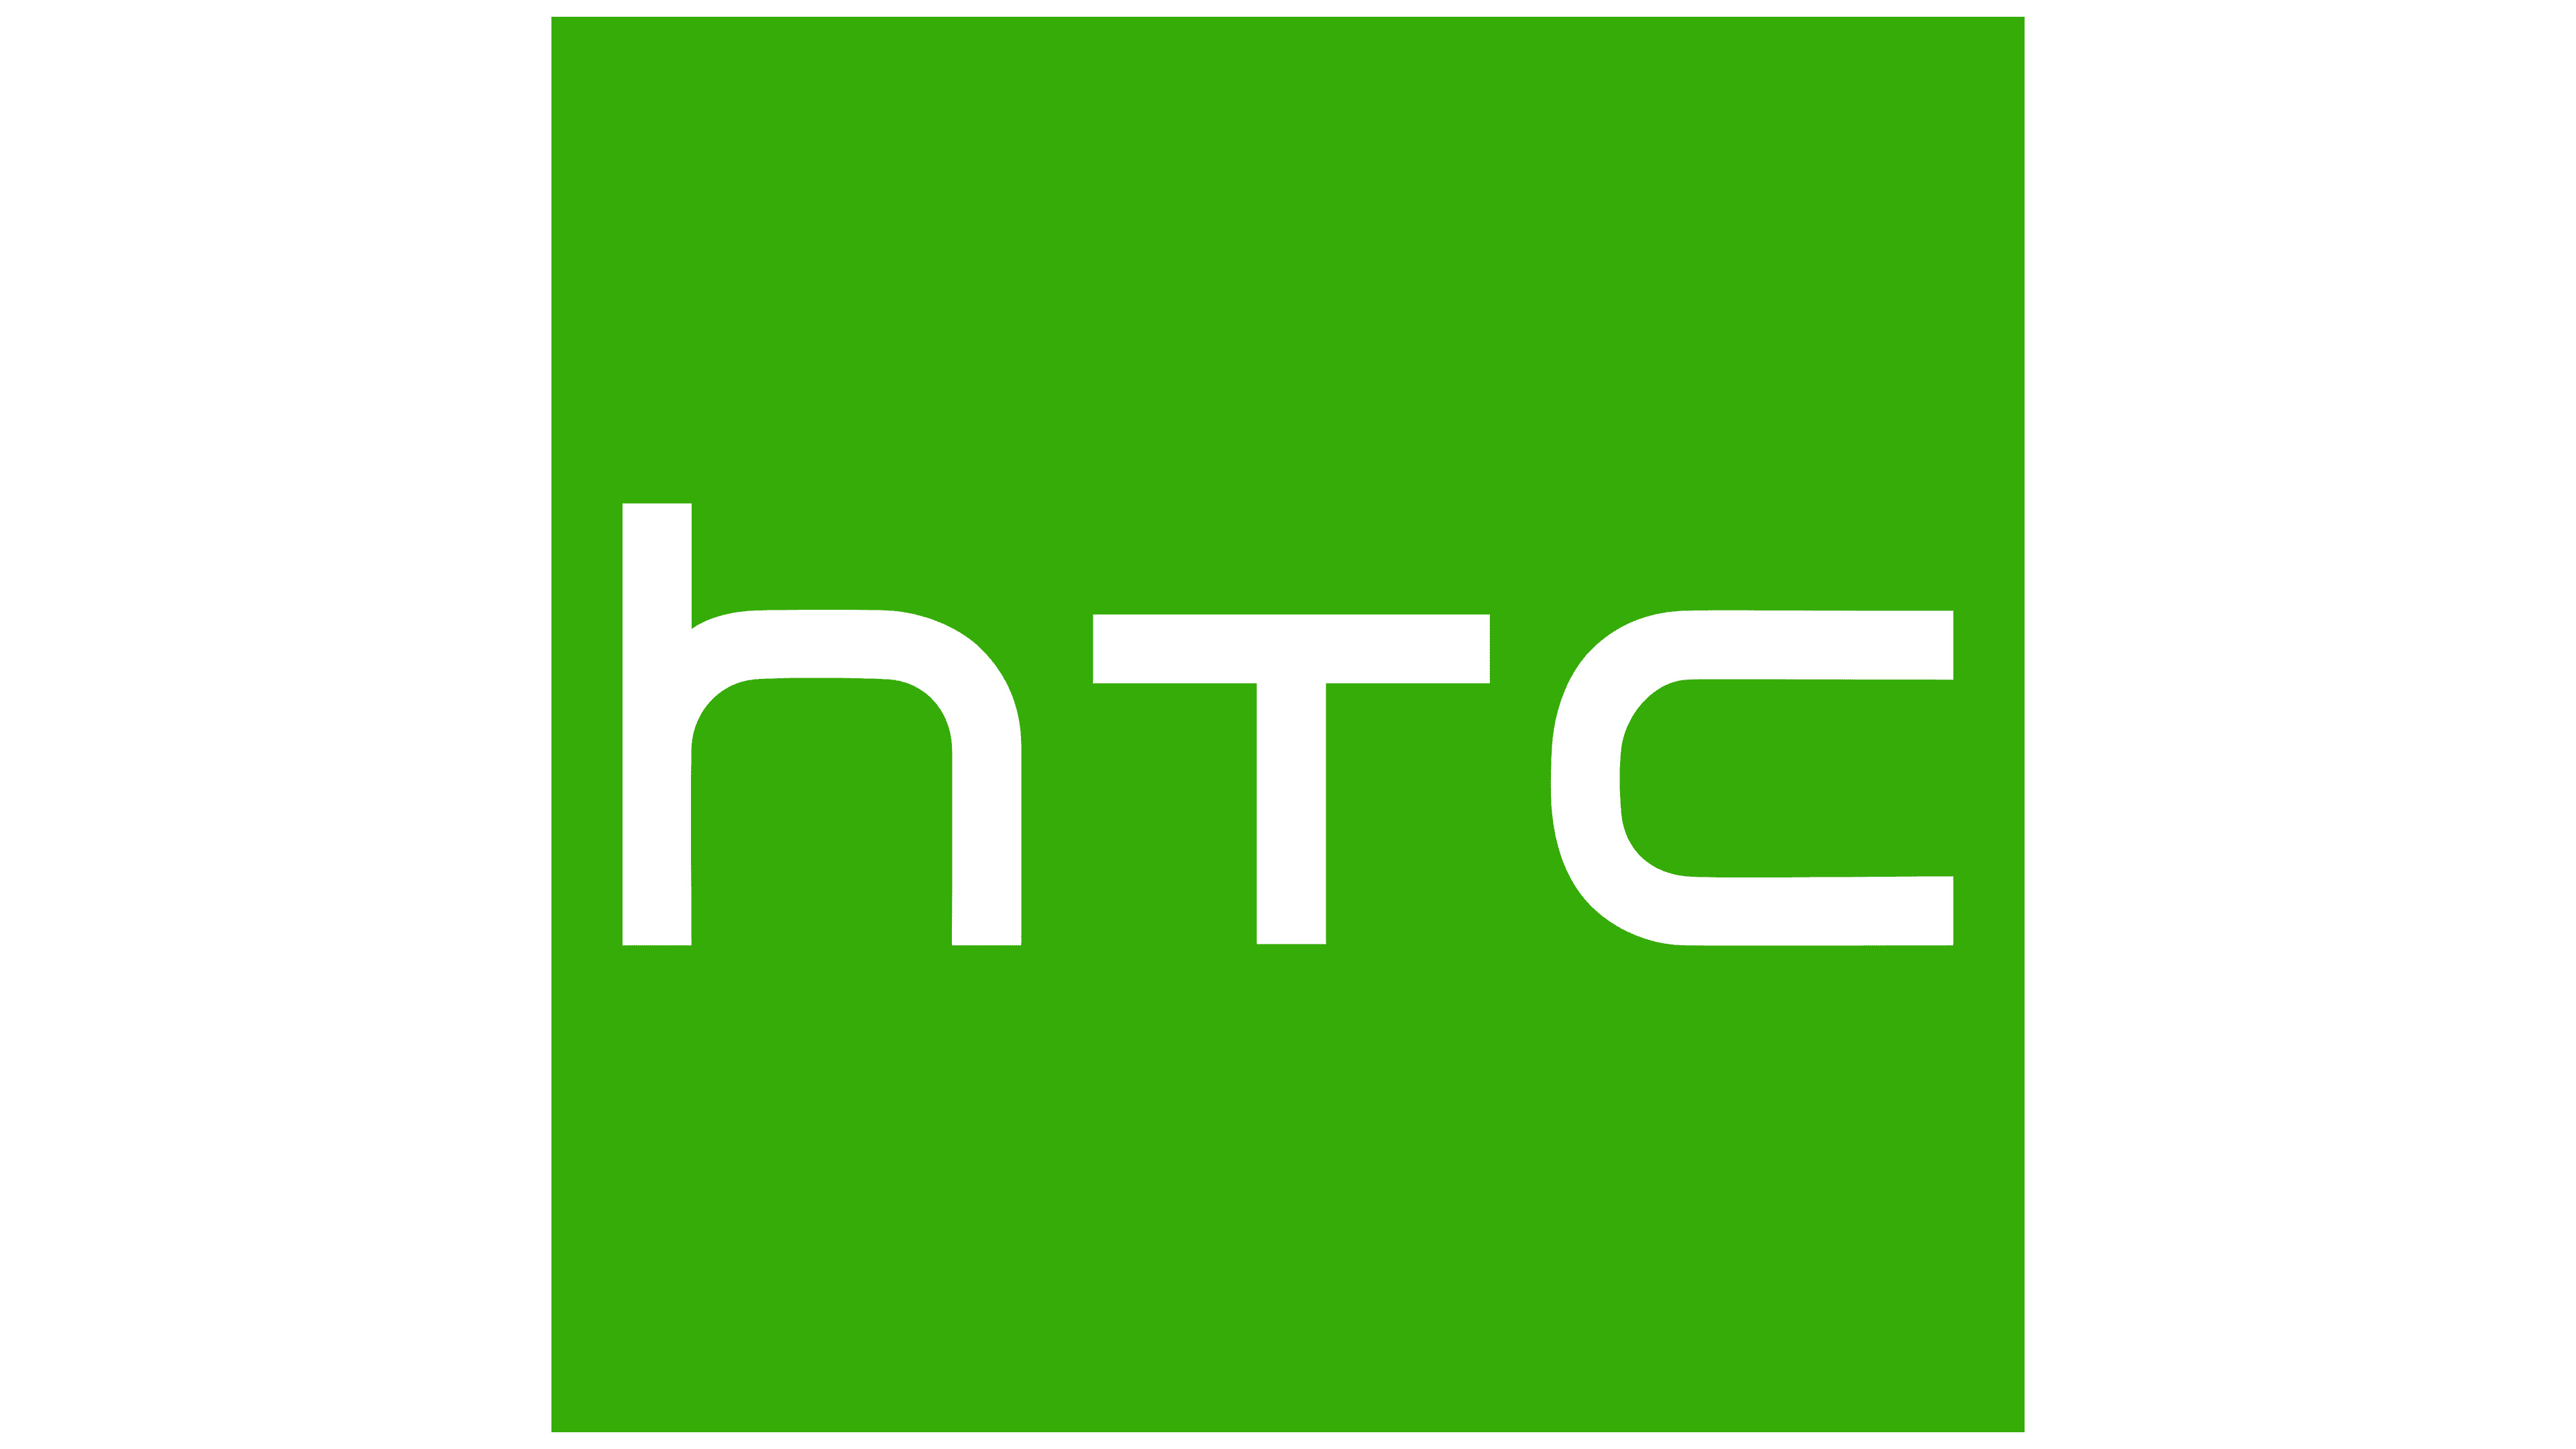 HTC Logo, symbol, meaning, history, PNG 3840x2160